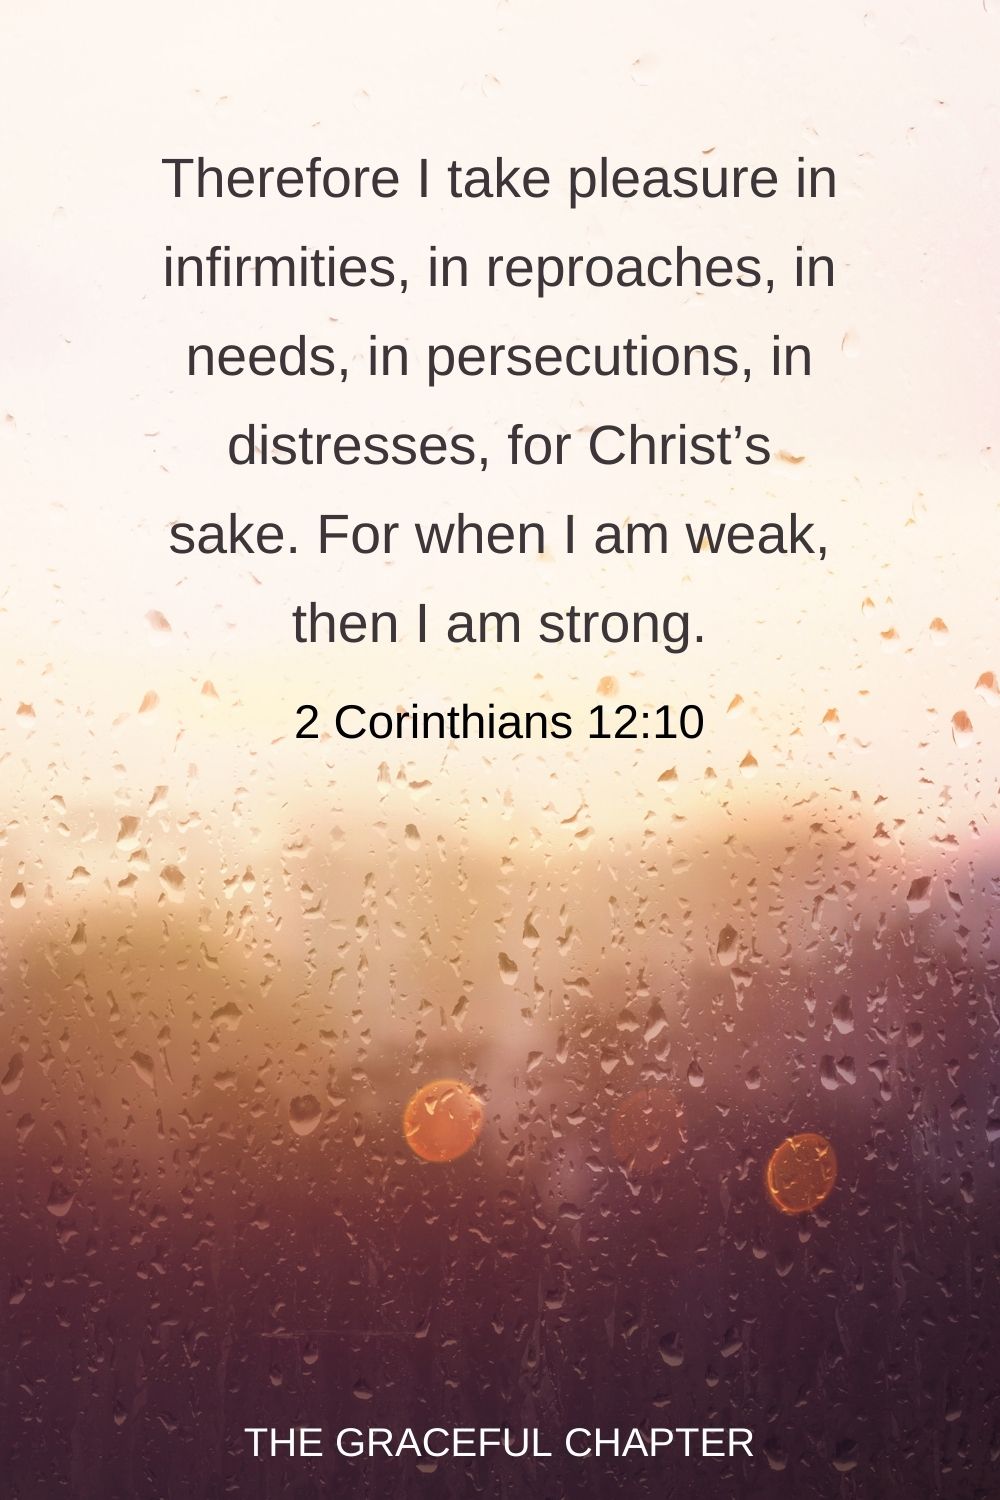 Therefore I take pleasure in infirmities, in reproaches, in needs, in persecutions, in distresses, for Christ’s sake. For when I am weak, then I am strong. 2 Corinthians 12:10